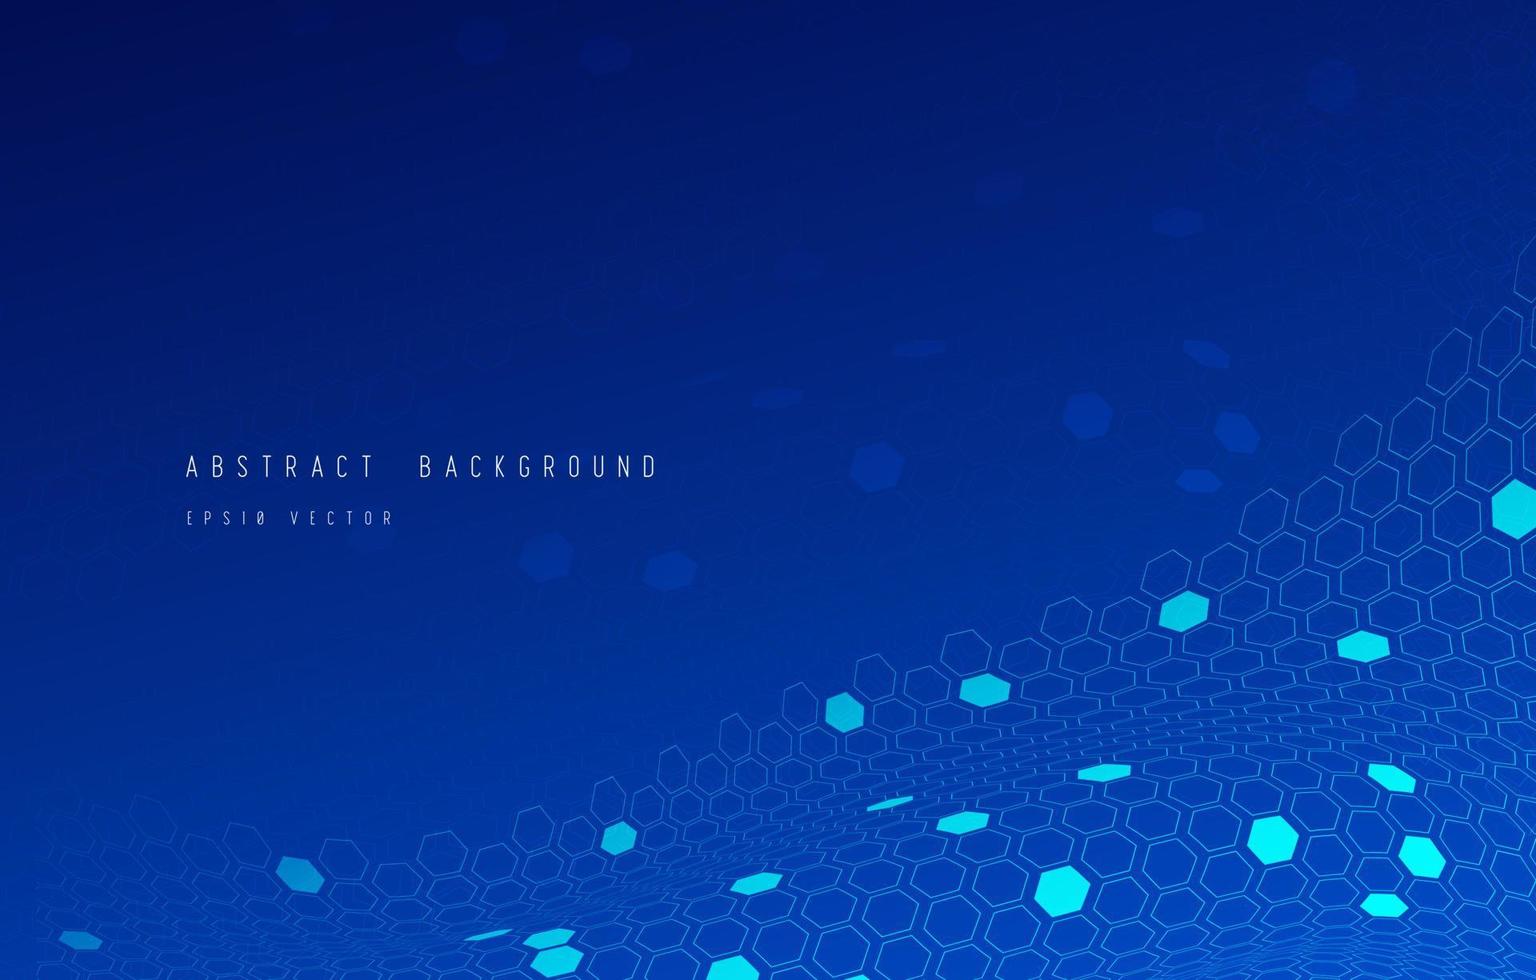 Abstract Lines and Dots connected with hexagon network elements on blue background design. Modern background for big data digital technology connection concept. Vector illustration